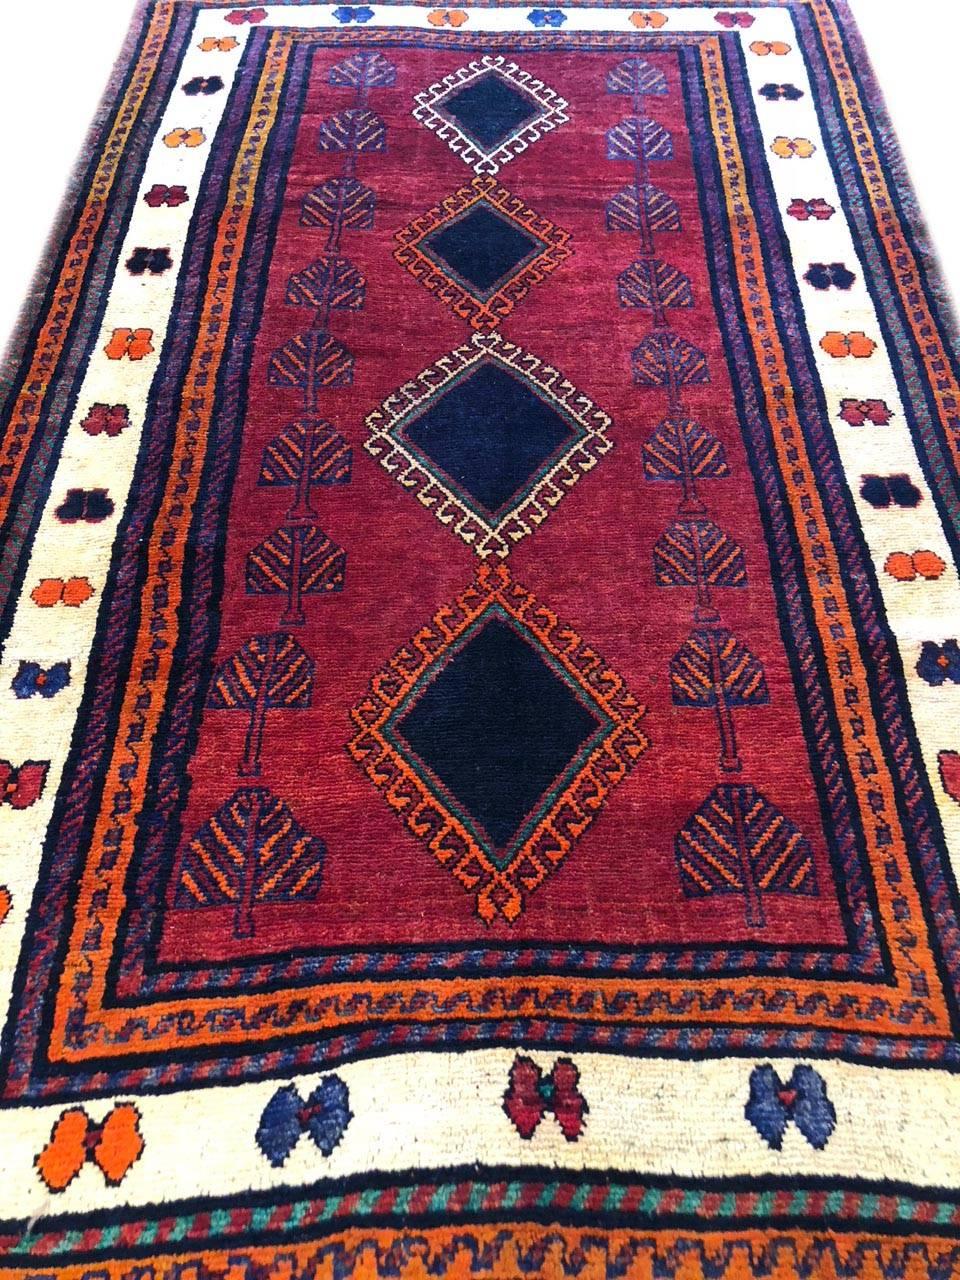 Late 20th Century Persian Hand-Knotted Tribal Red Shiraz Rug